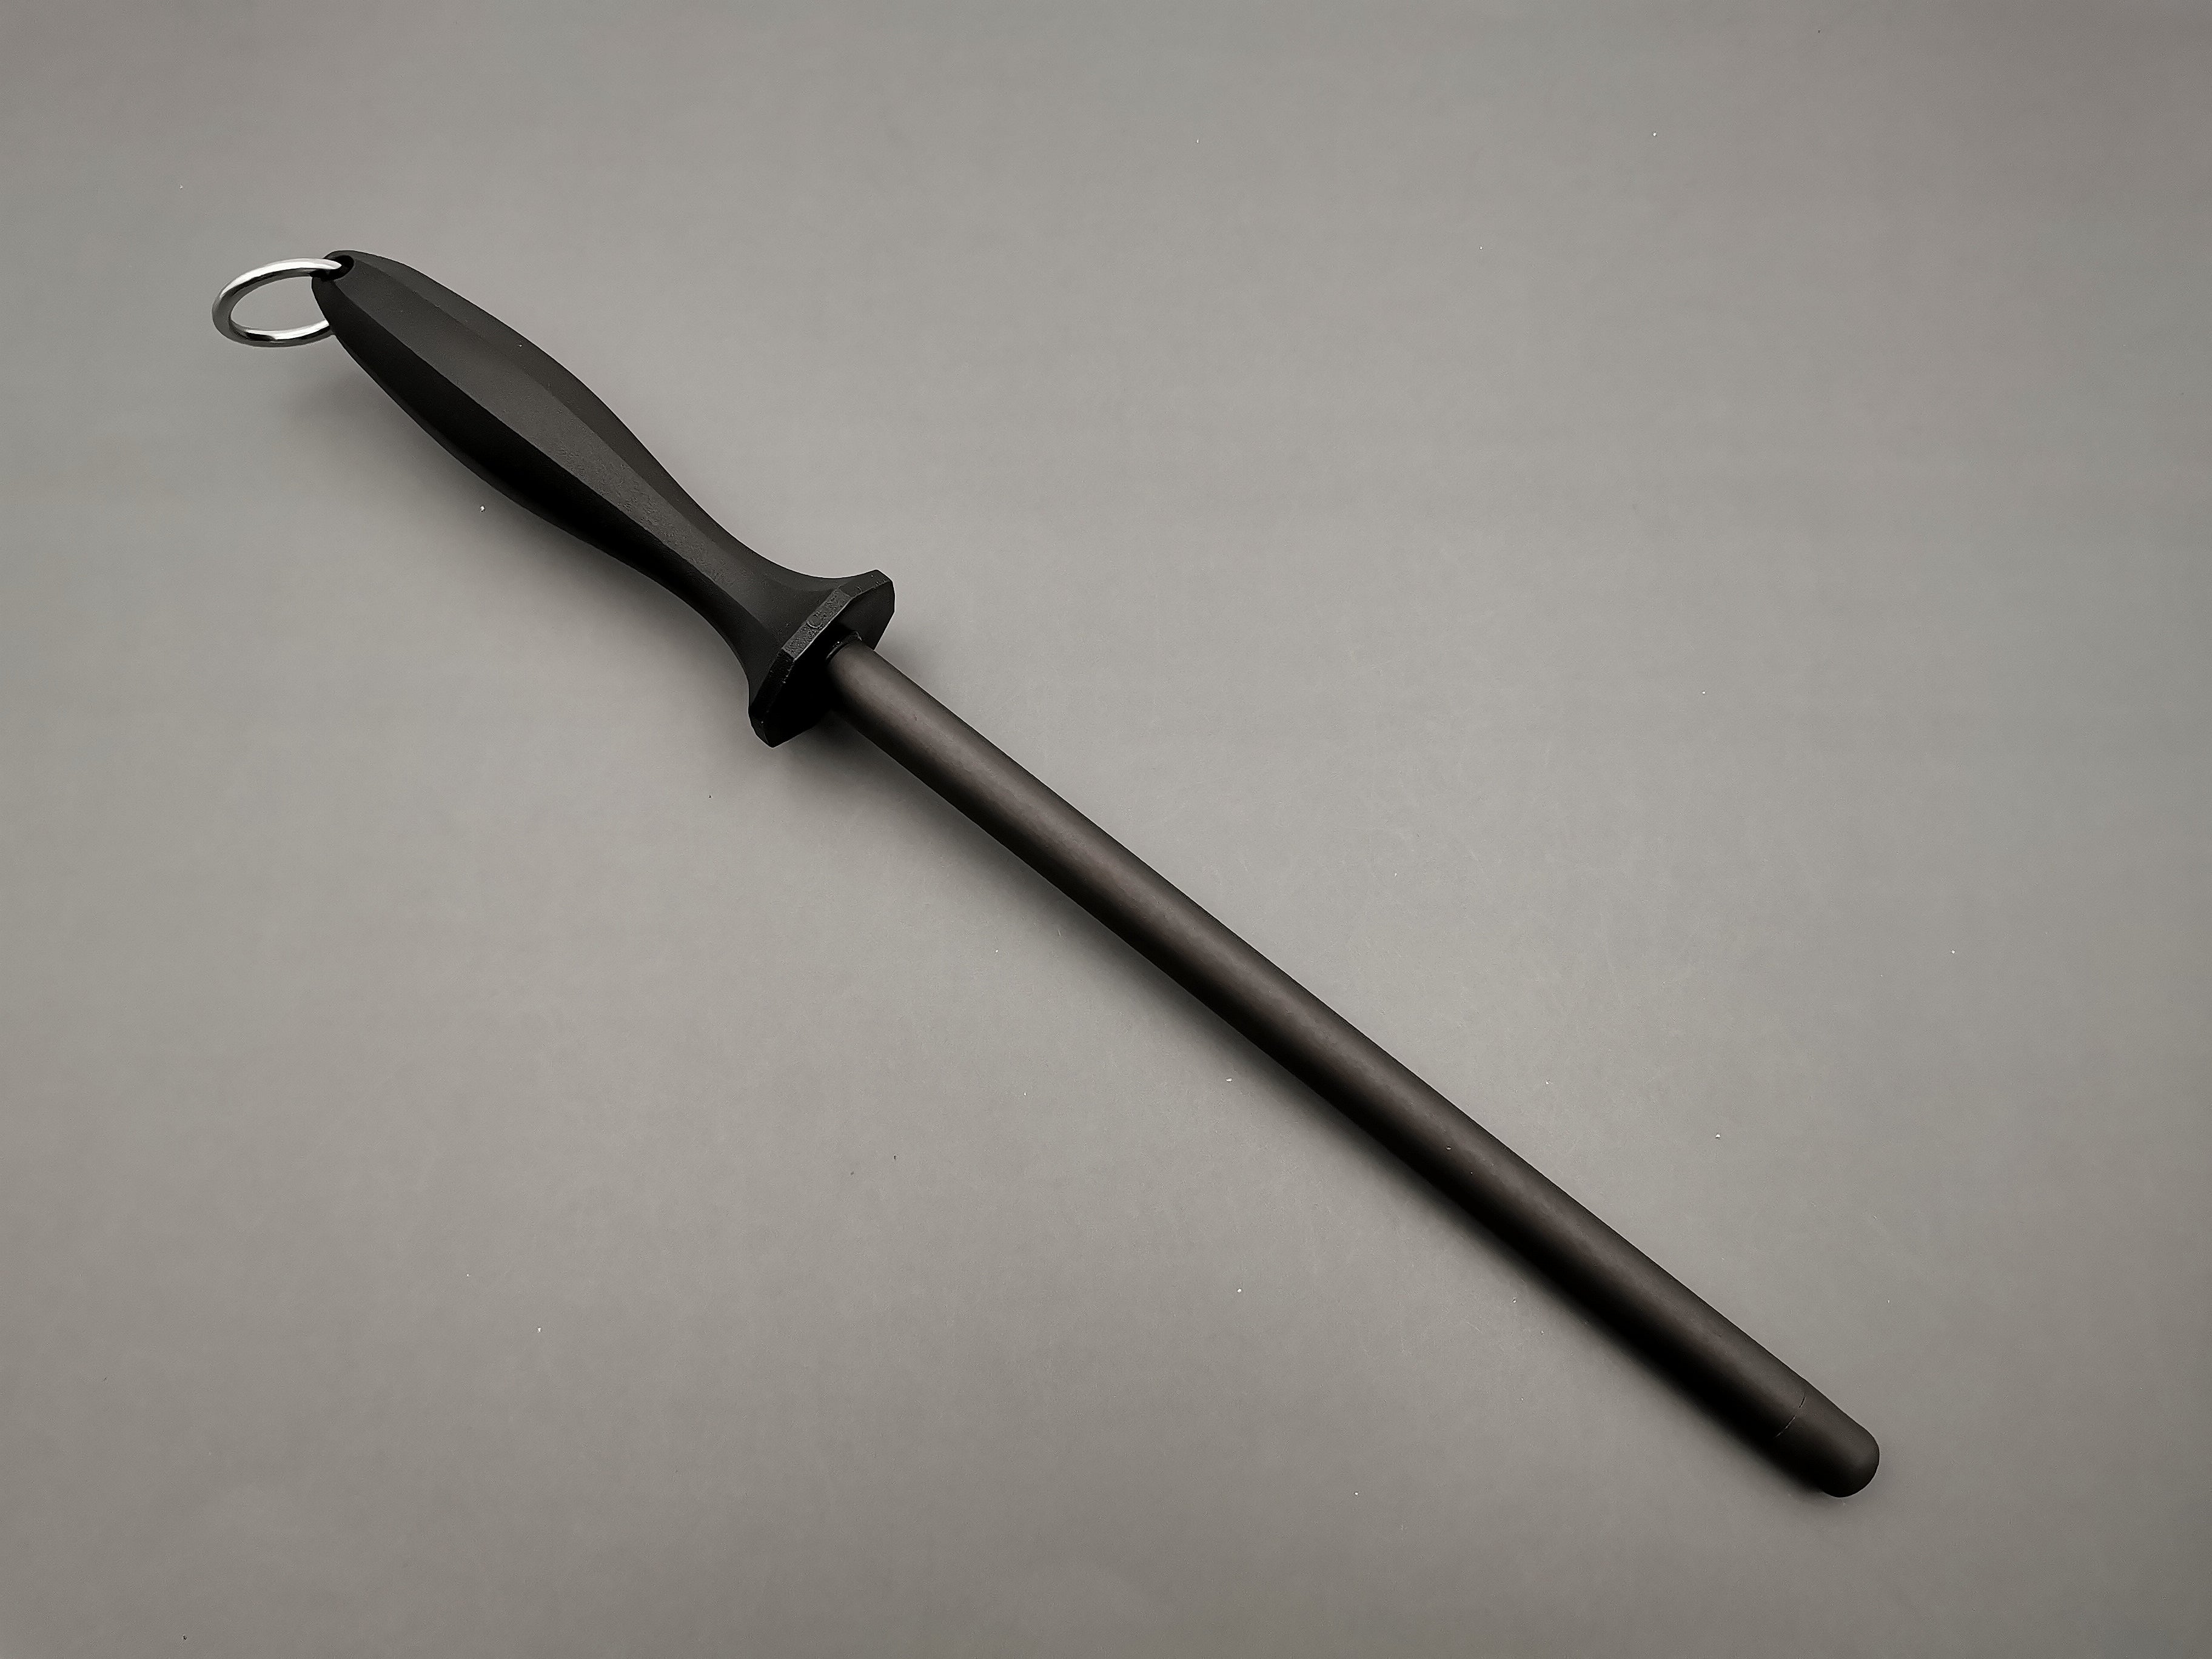 A ceramic honing rod is used to maintain the existing edge of your knife